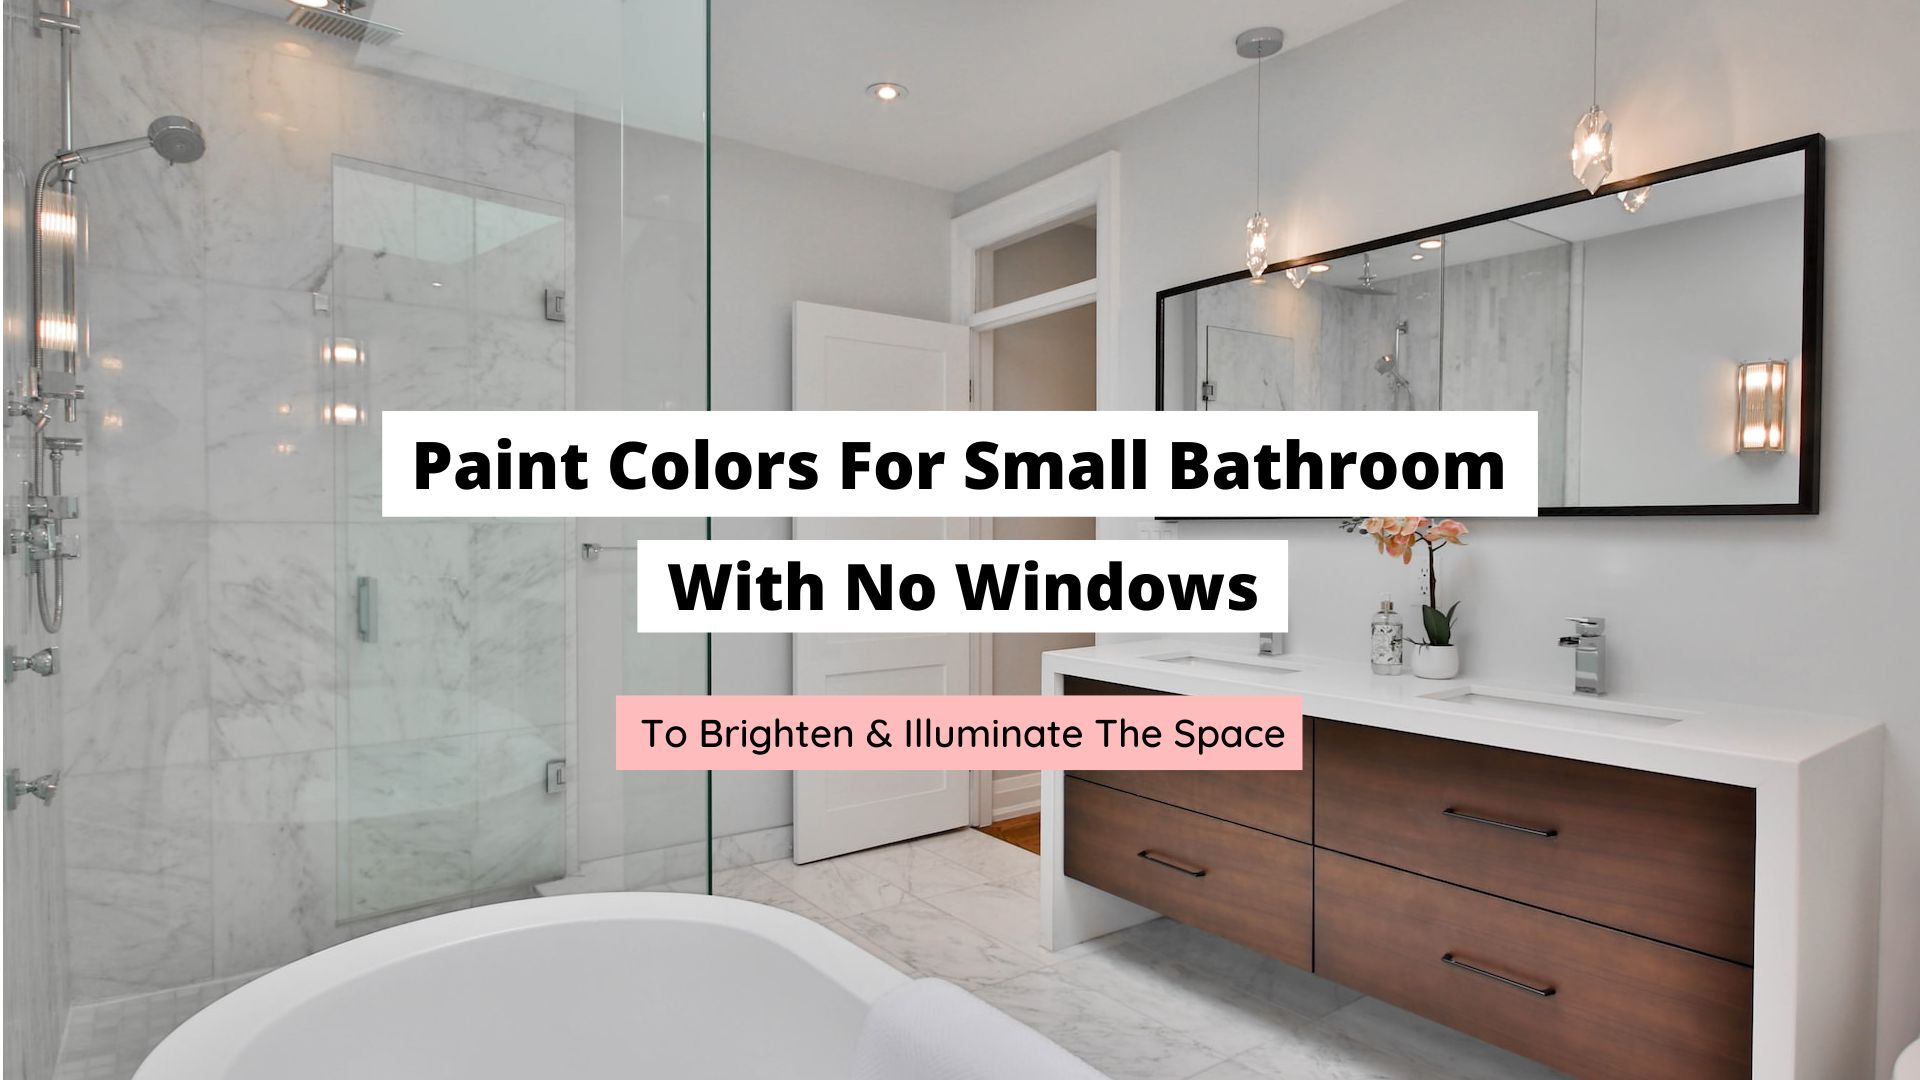 10 FeelGood Paint Colors For A Small Bathroom With No Windows